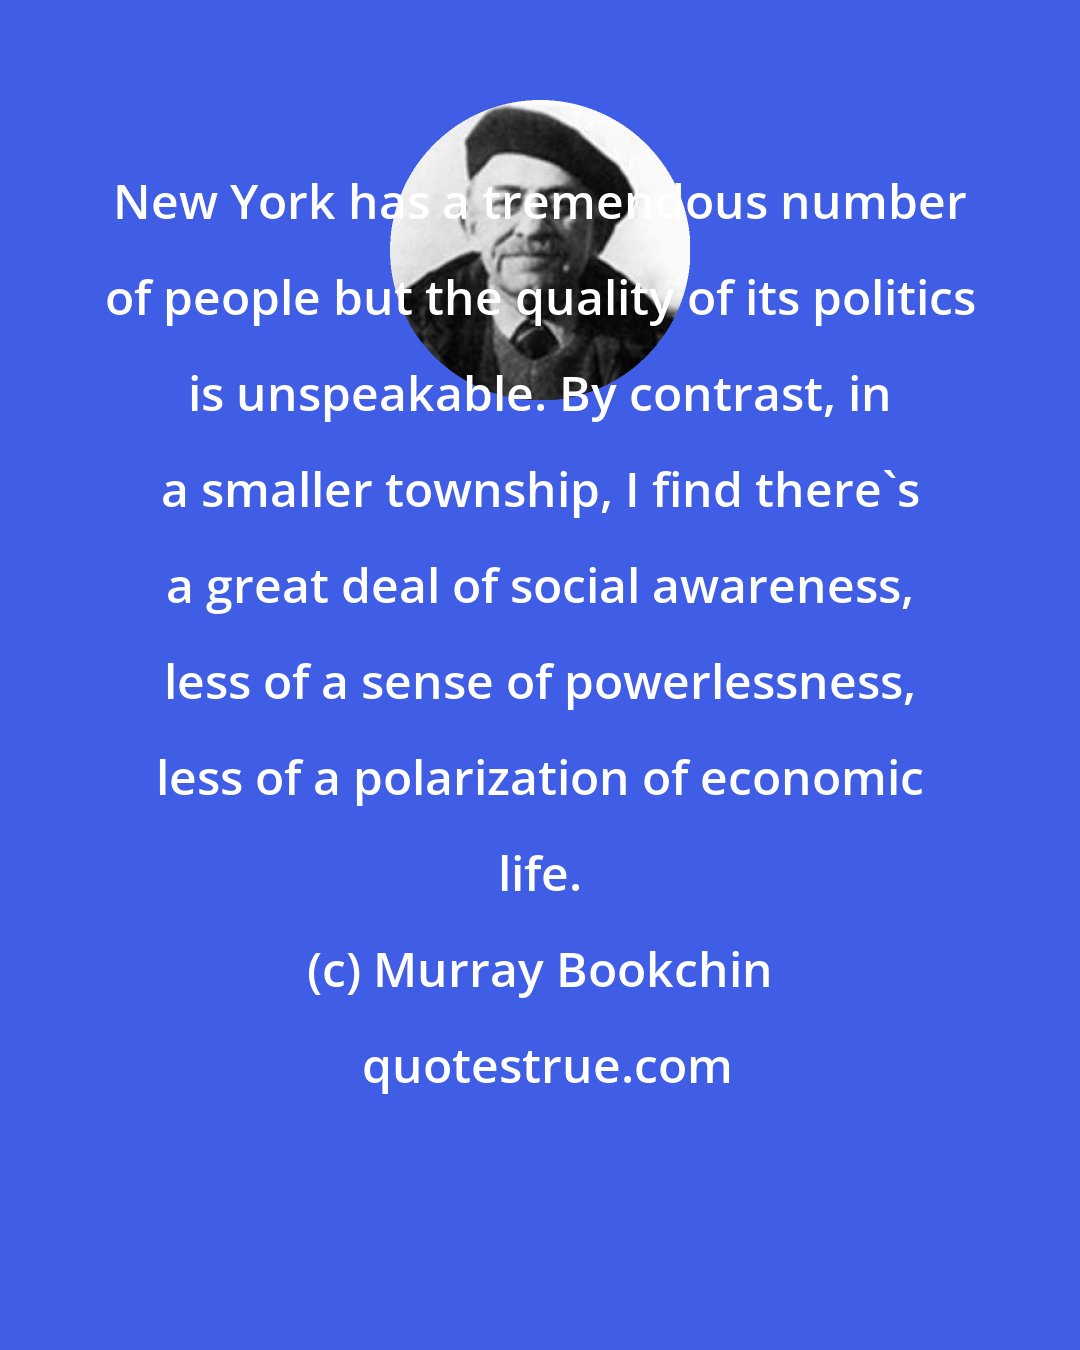 Murray Bookchin: New York has a tremendous number of people but the quality of its politics is unspeakable. By contrast, in a smaller township, I find there's a great deal of social awareness, less of a sense of powerlessness, less of a polarization of economic life.